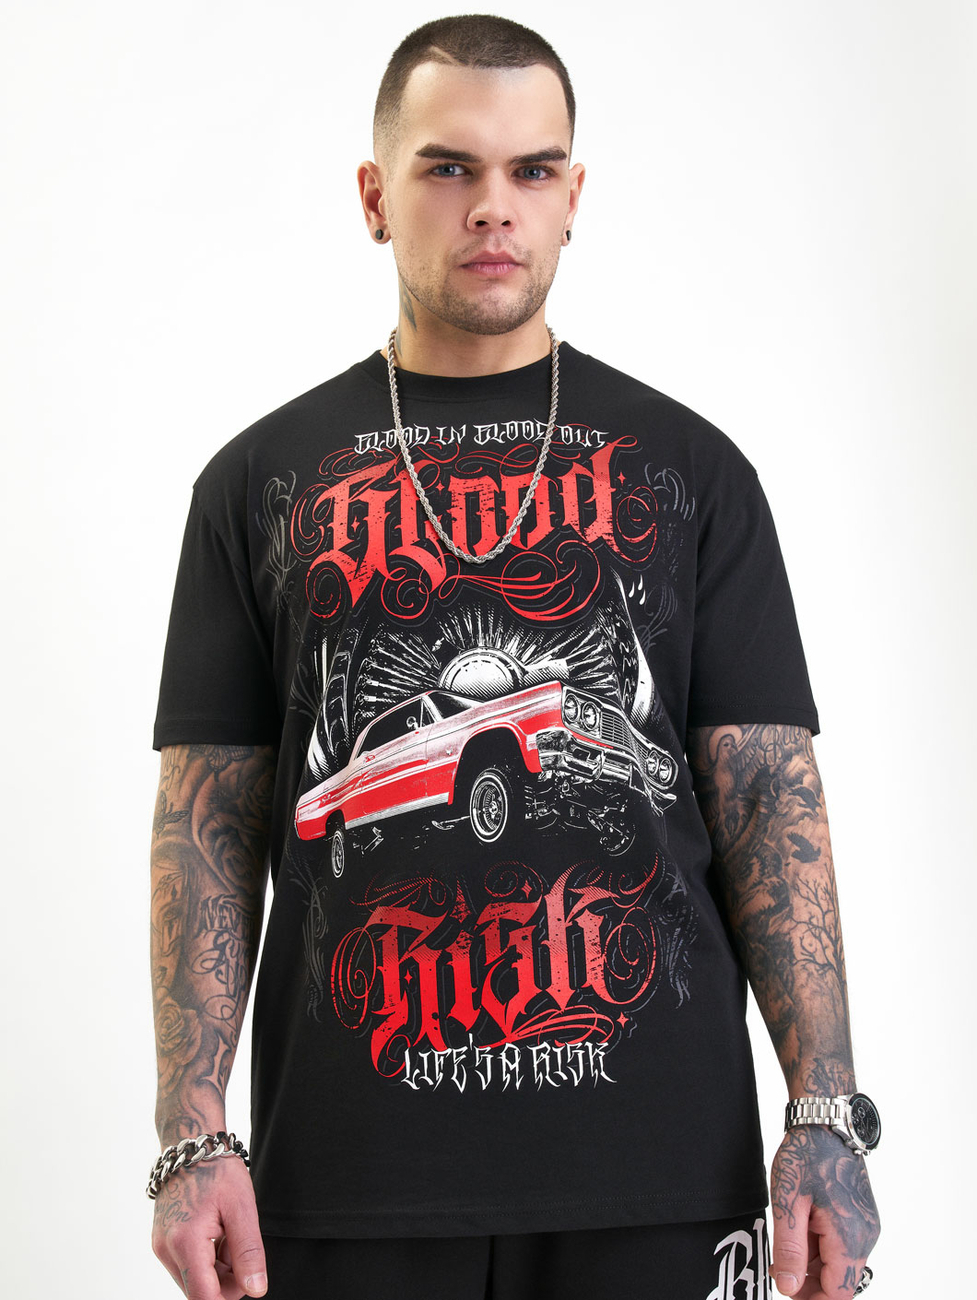 Blood In Blood Out Tavos T-Shirt S